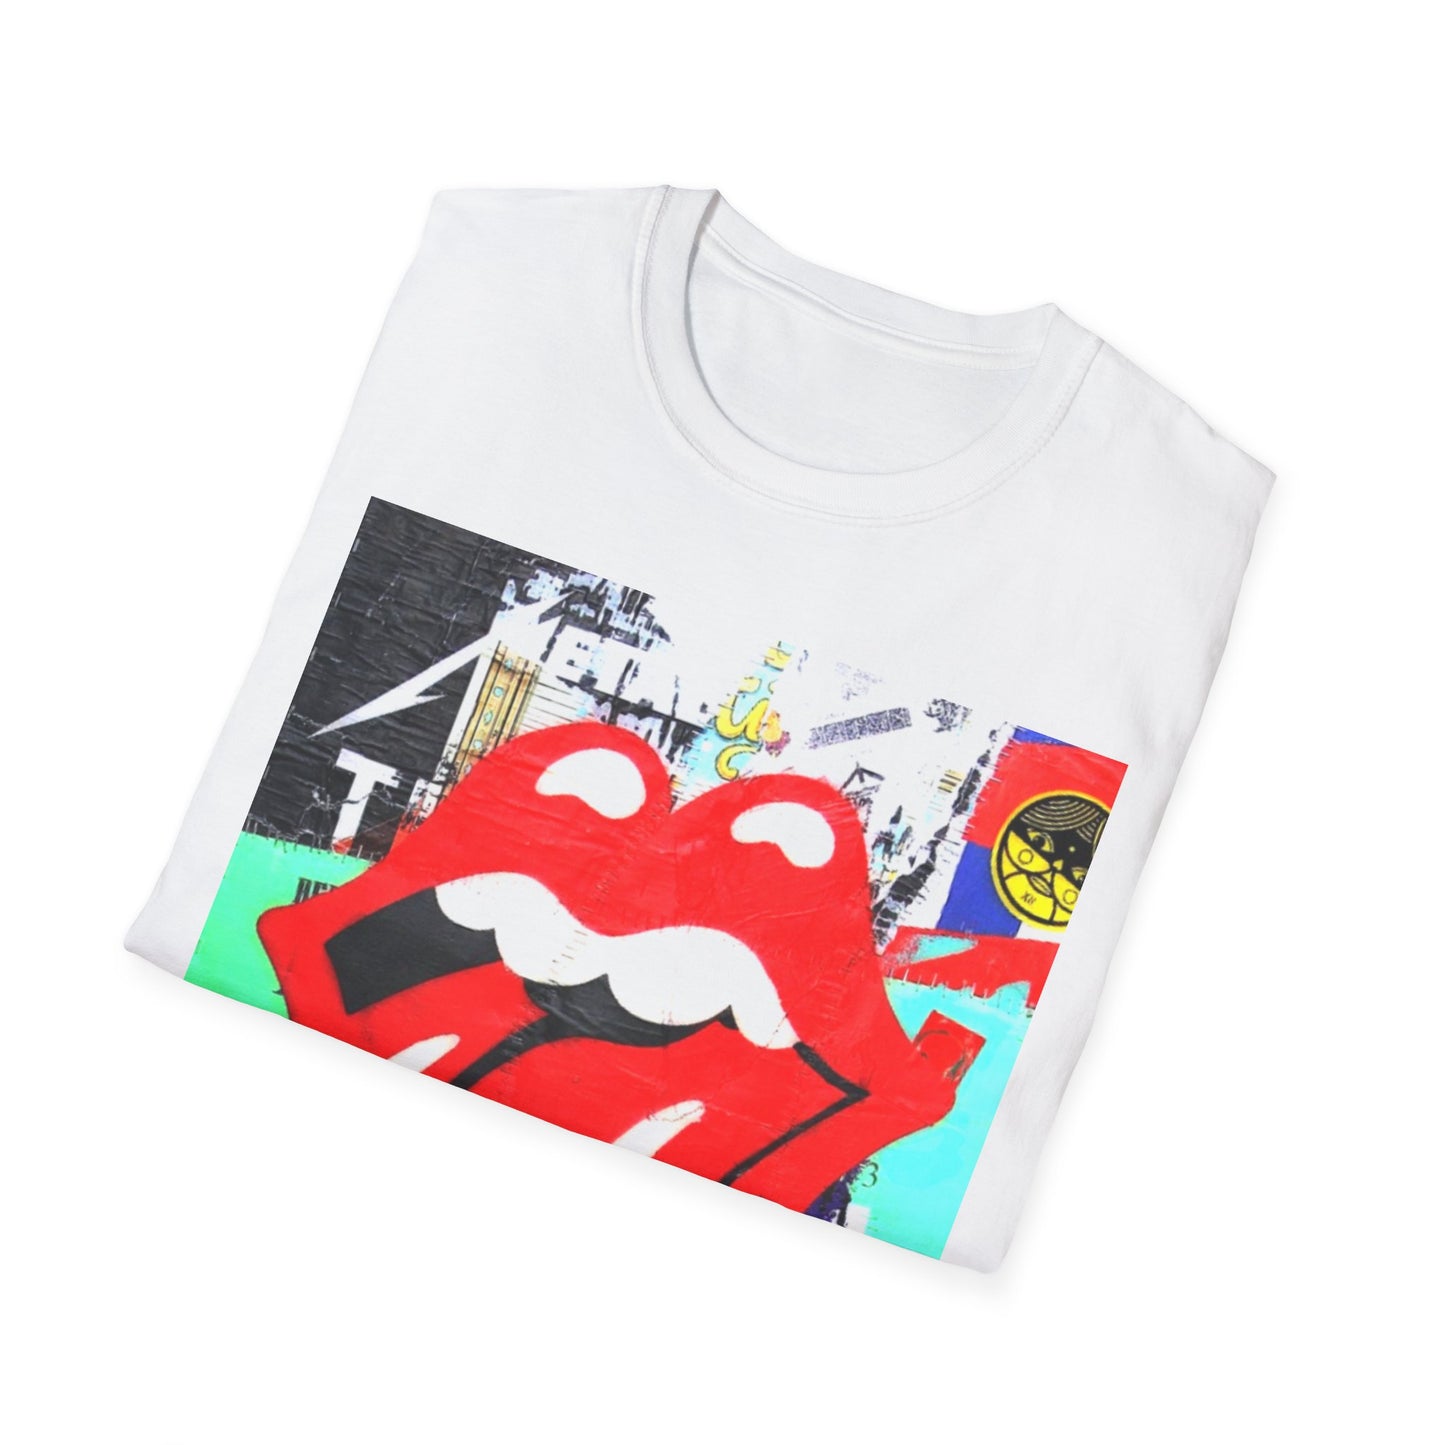 BIG MOUTH Classic Fit AmplifyDestroy Print Tee Shirt Rolling Stones Men Women Black White